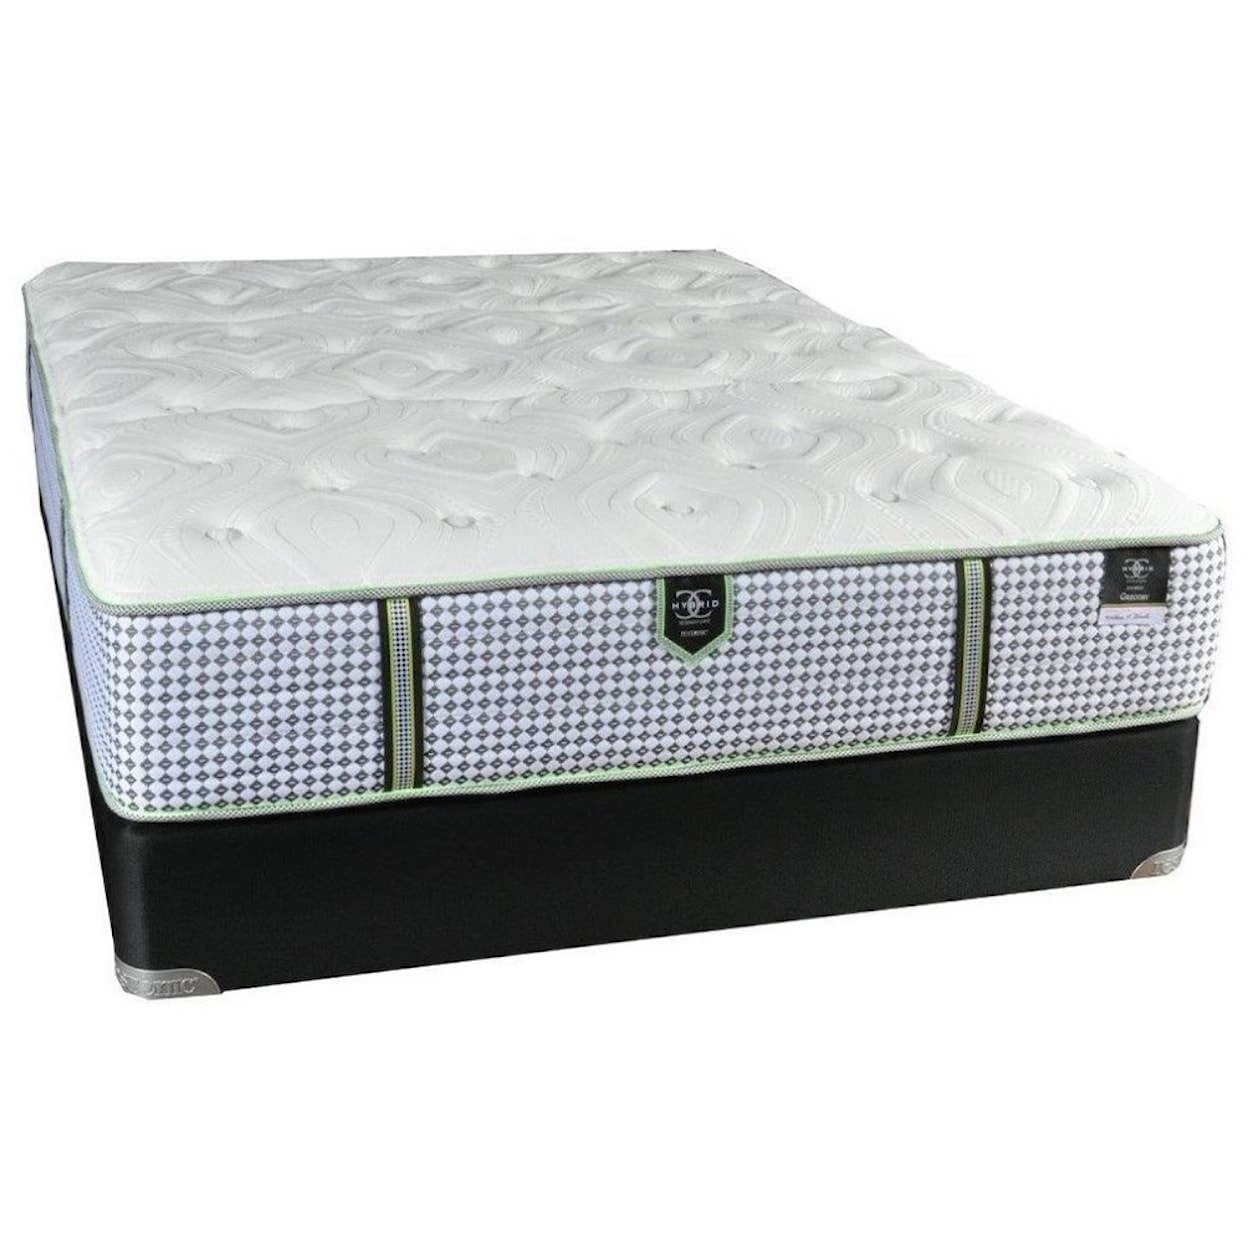 Restonic Gregory Firm Queen Pocketed Coil Mattress Set